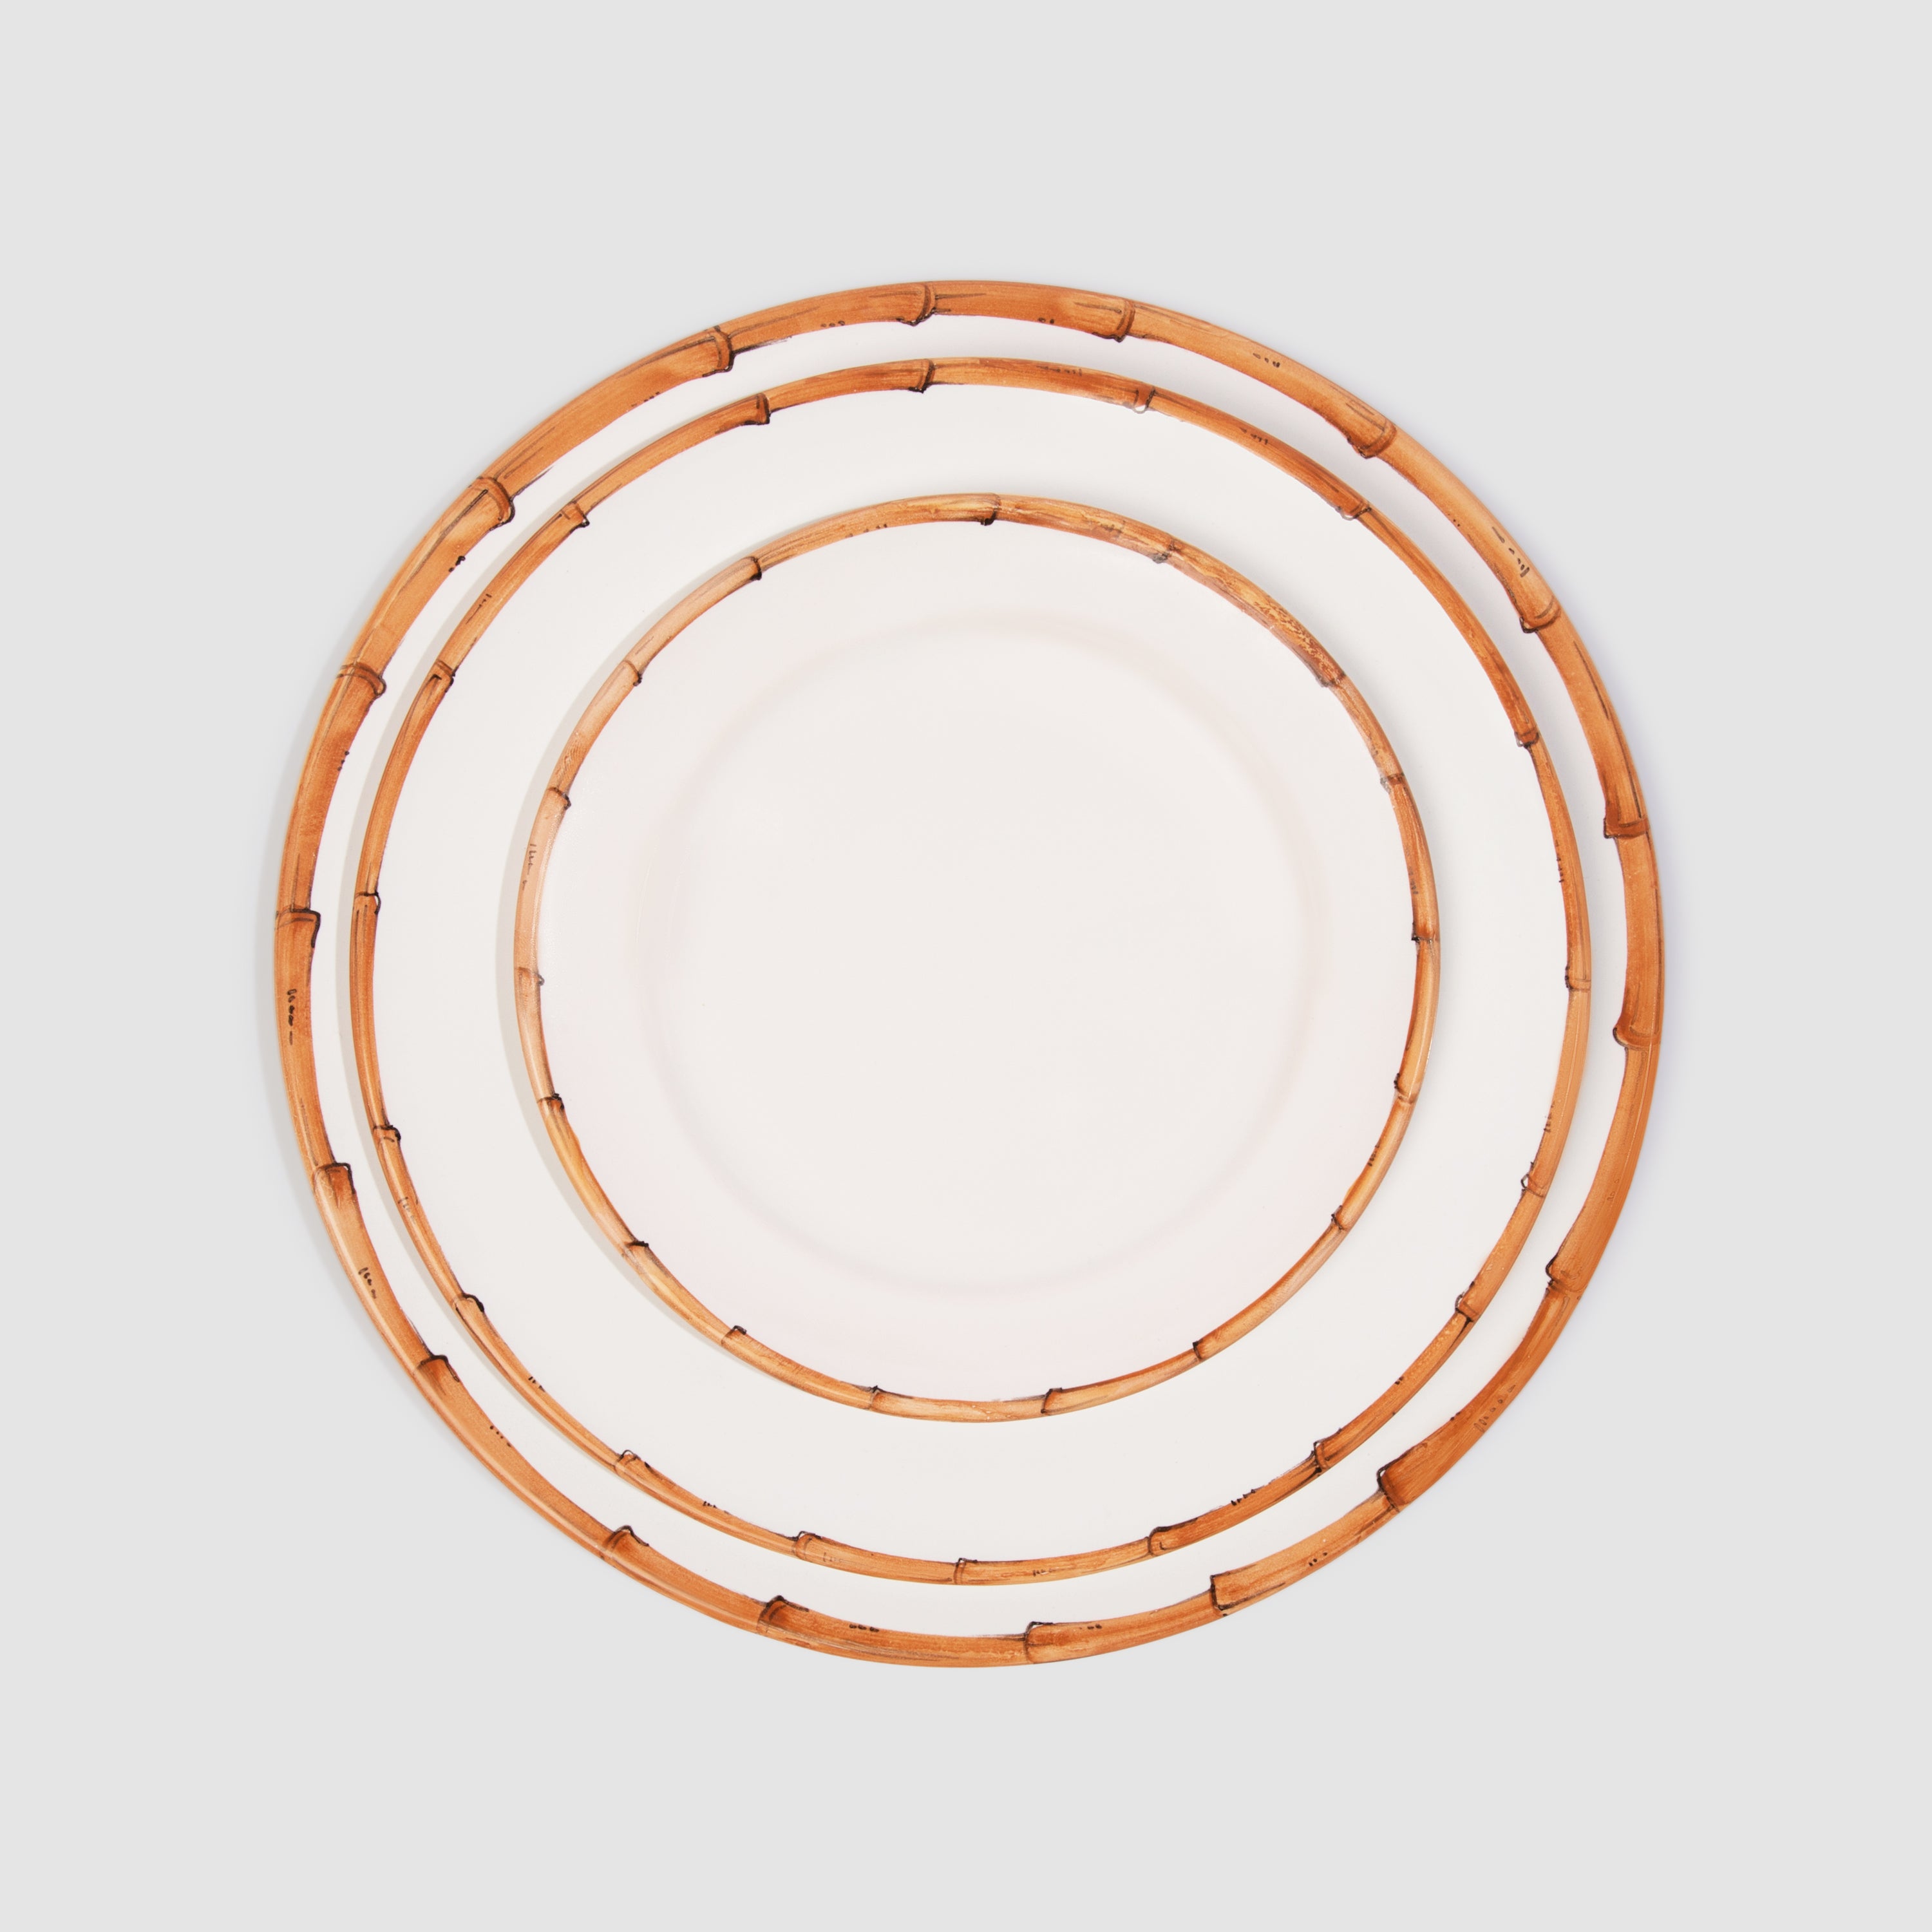 Ramatuelle Bamboo Large Dinner/Charger Plate, Natural